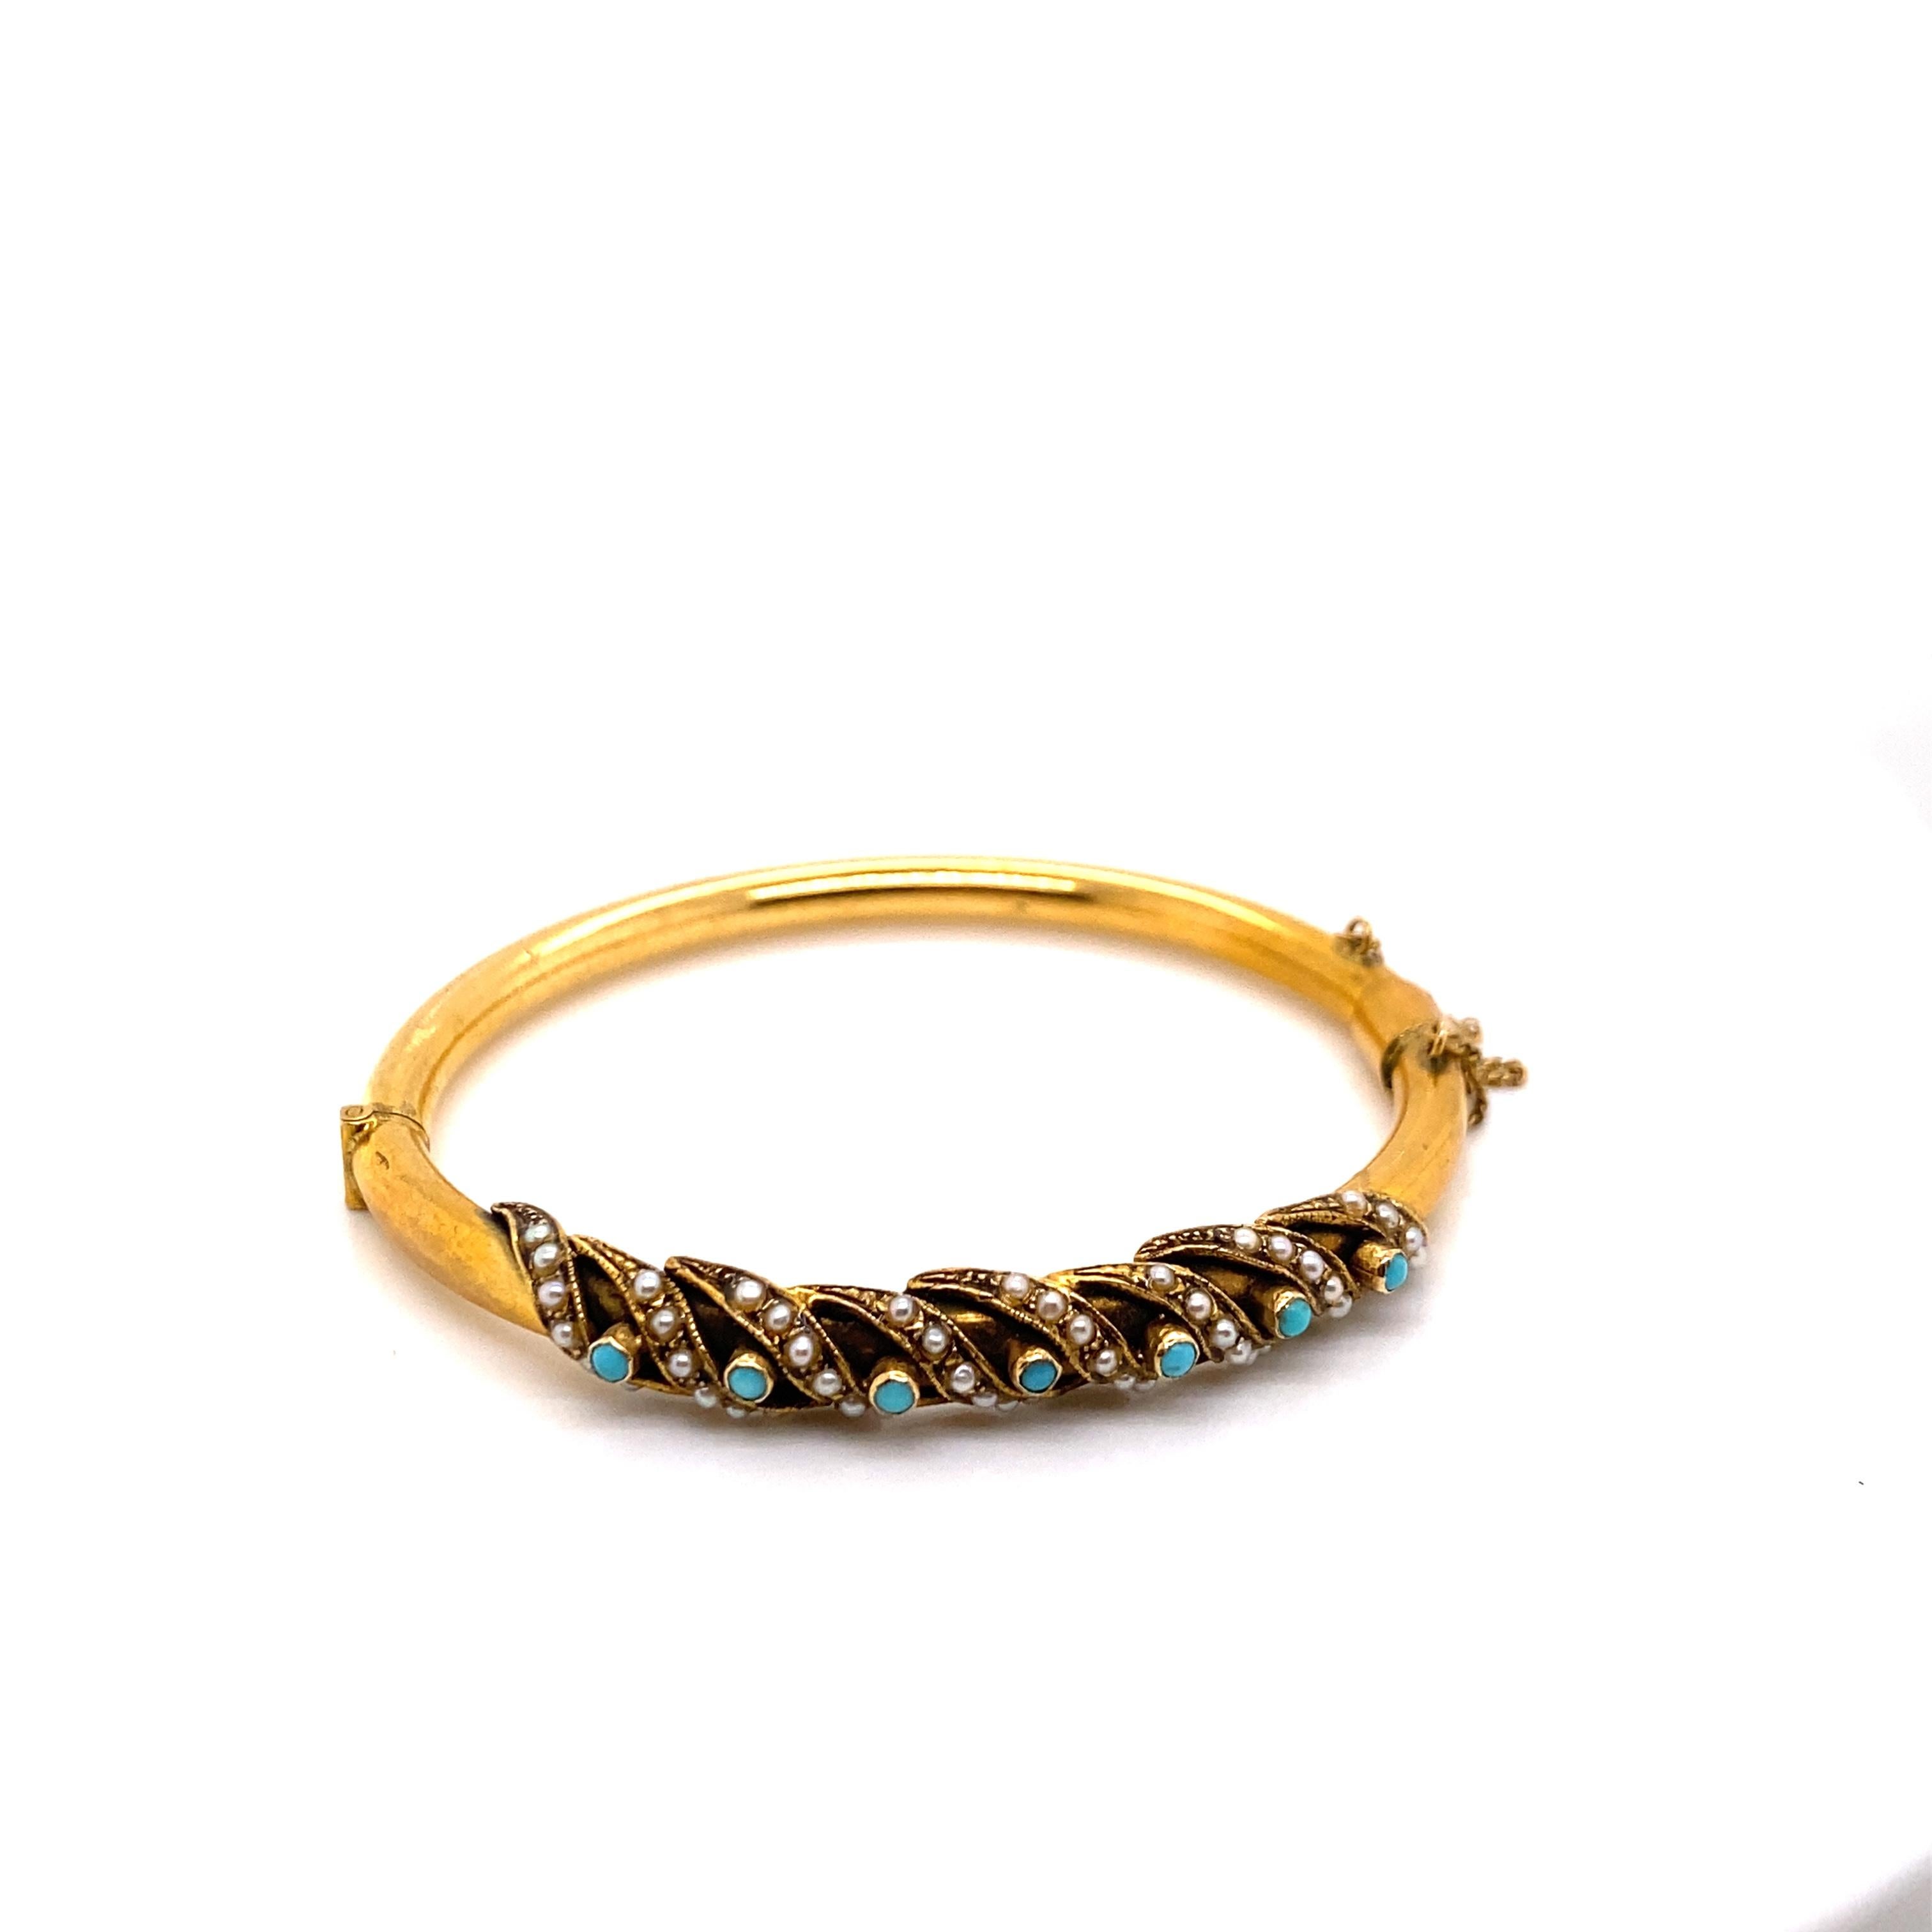 Bead Vintage 1970's 14K Yellow Gold Bangle Bracelet with Turquoise and Seed Pearls For Sale